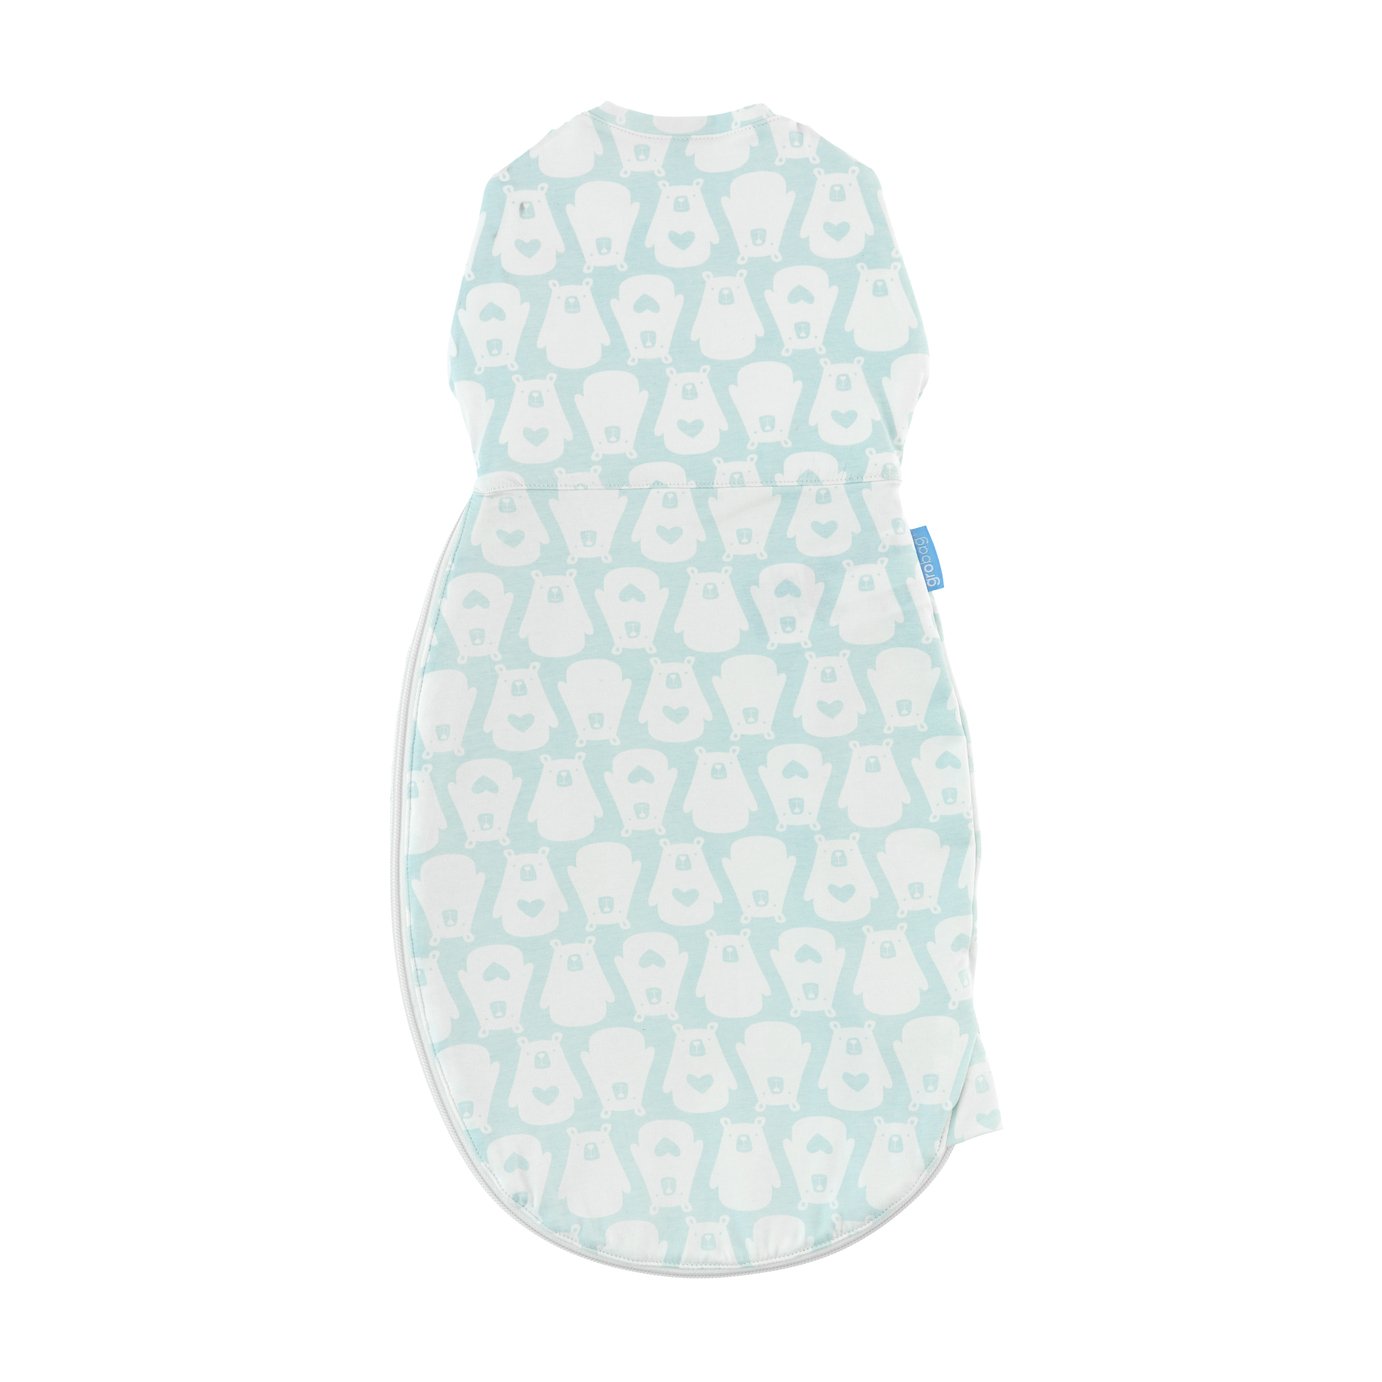 Gro Bennie Grosnug Swaddle and Growbag Review